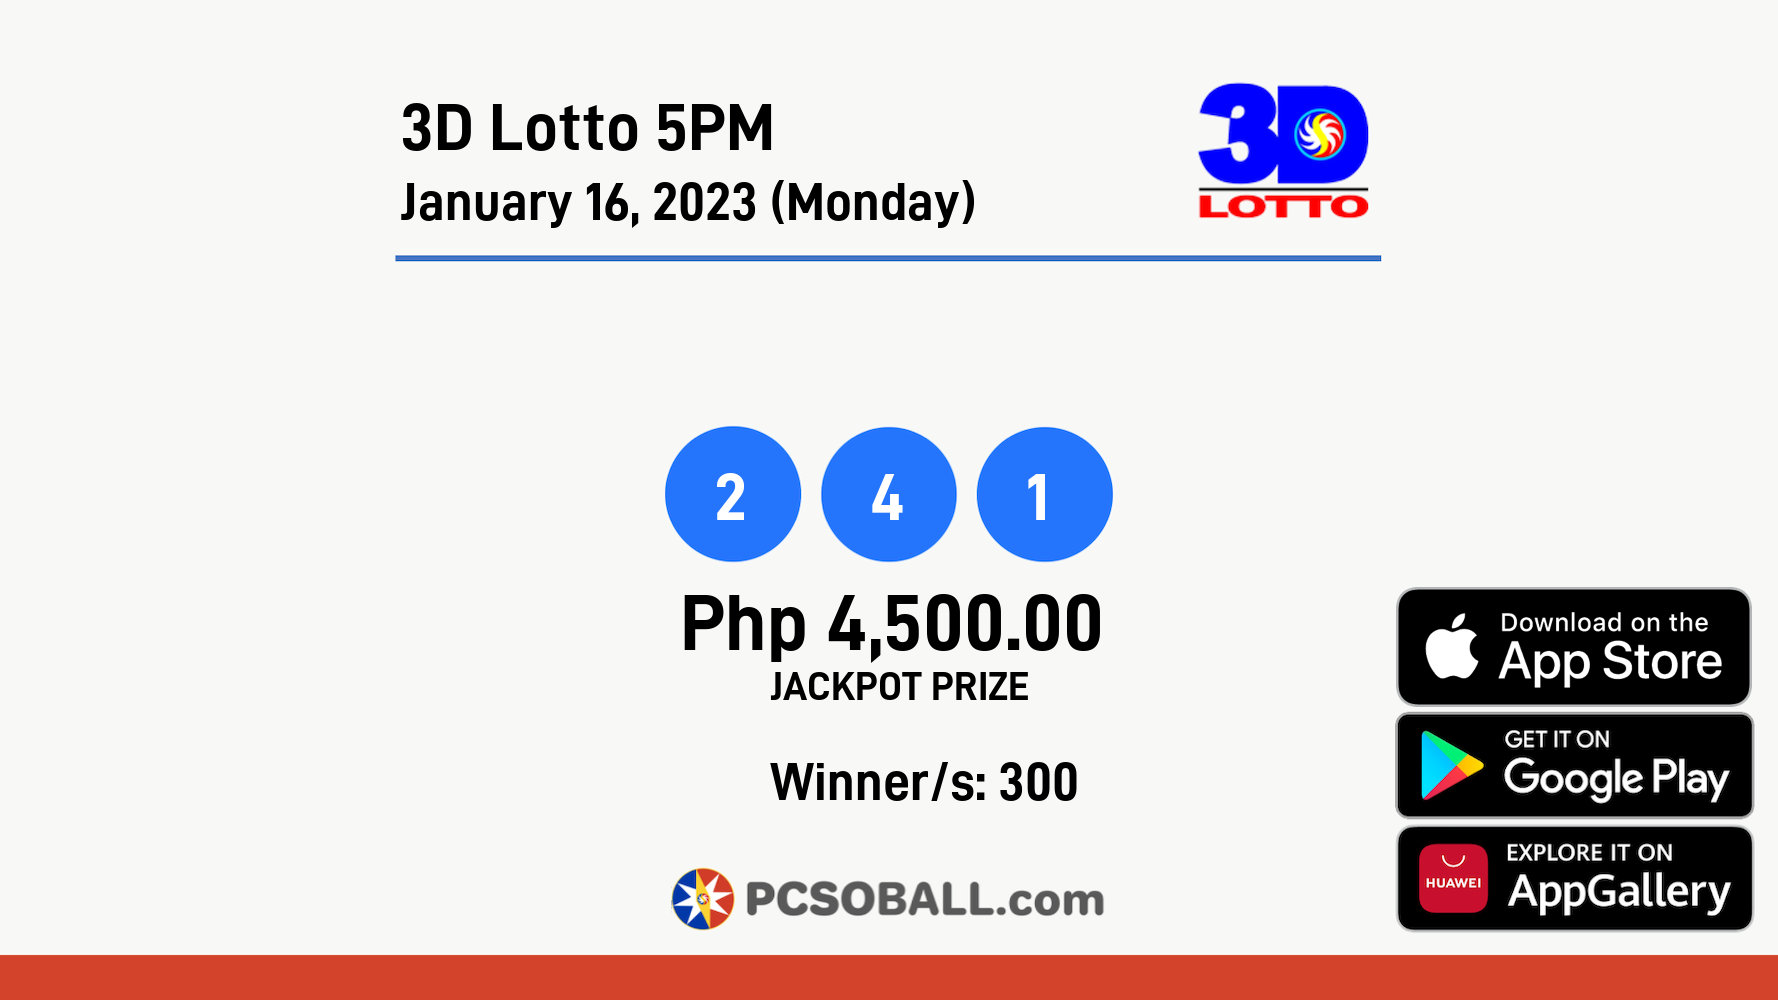 3D Lotto 5PM January 16, 2023 (Monday) Result